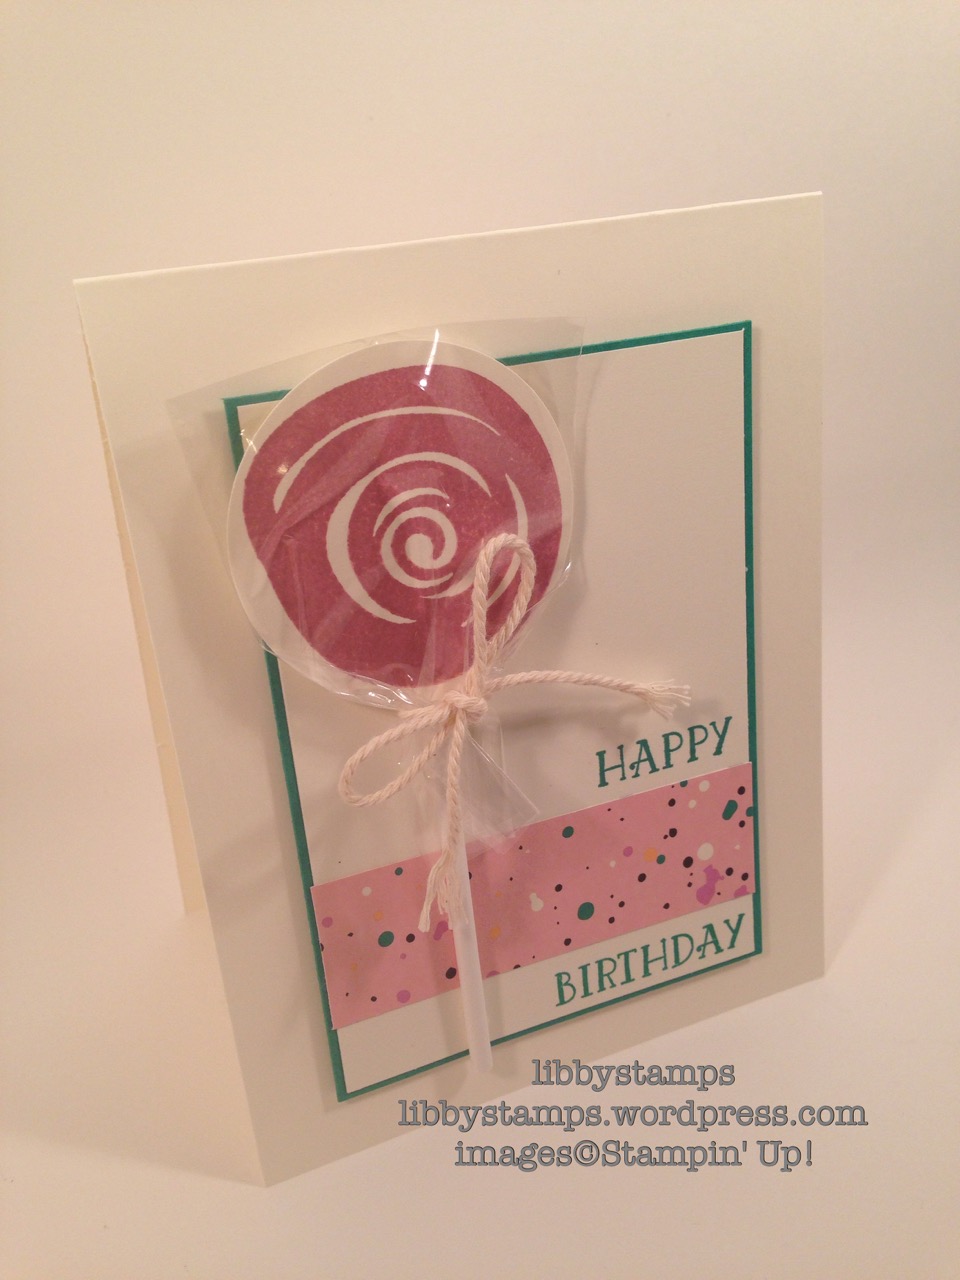 libbystamps, stampin up, Swirly Bird, Number of Years, Playful Palette DSP, lollipop